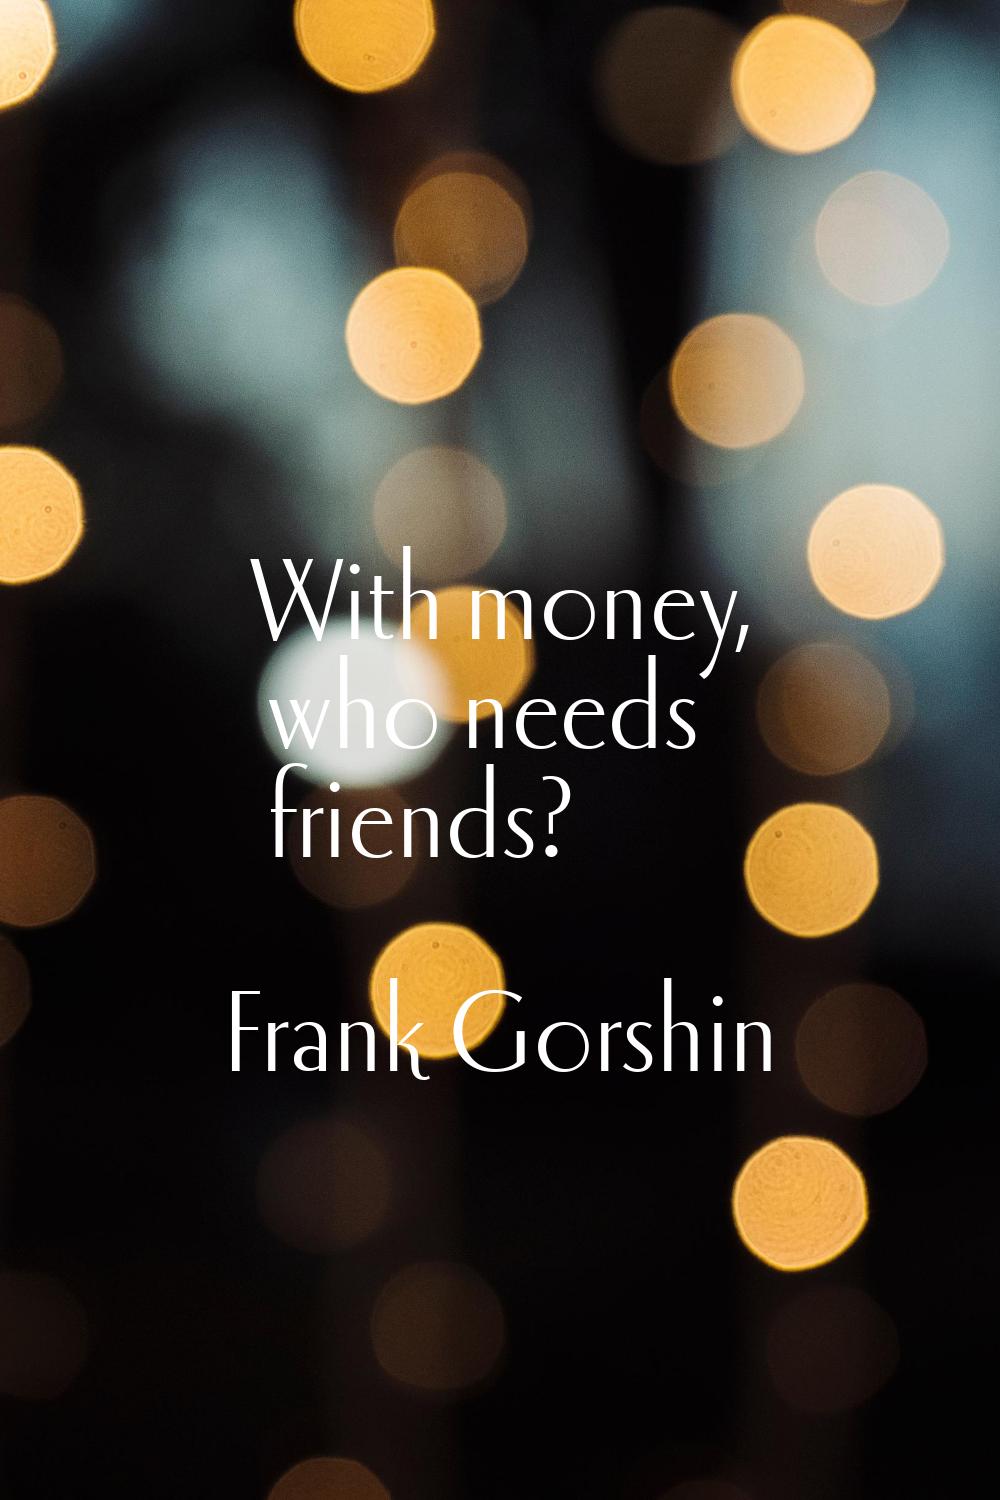 With money, who needs friends?